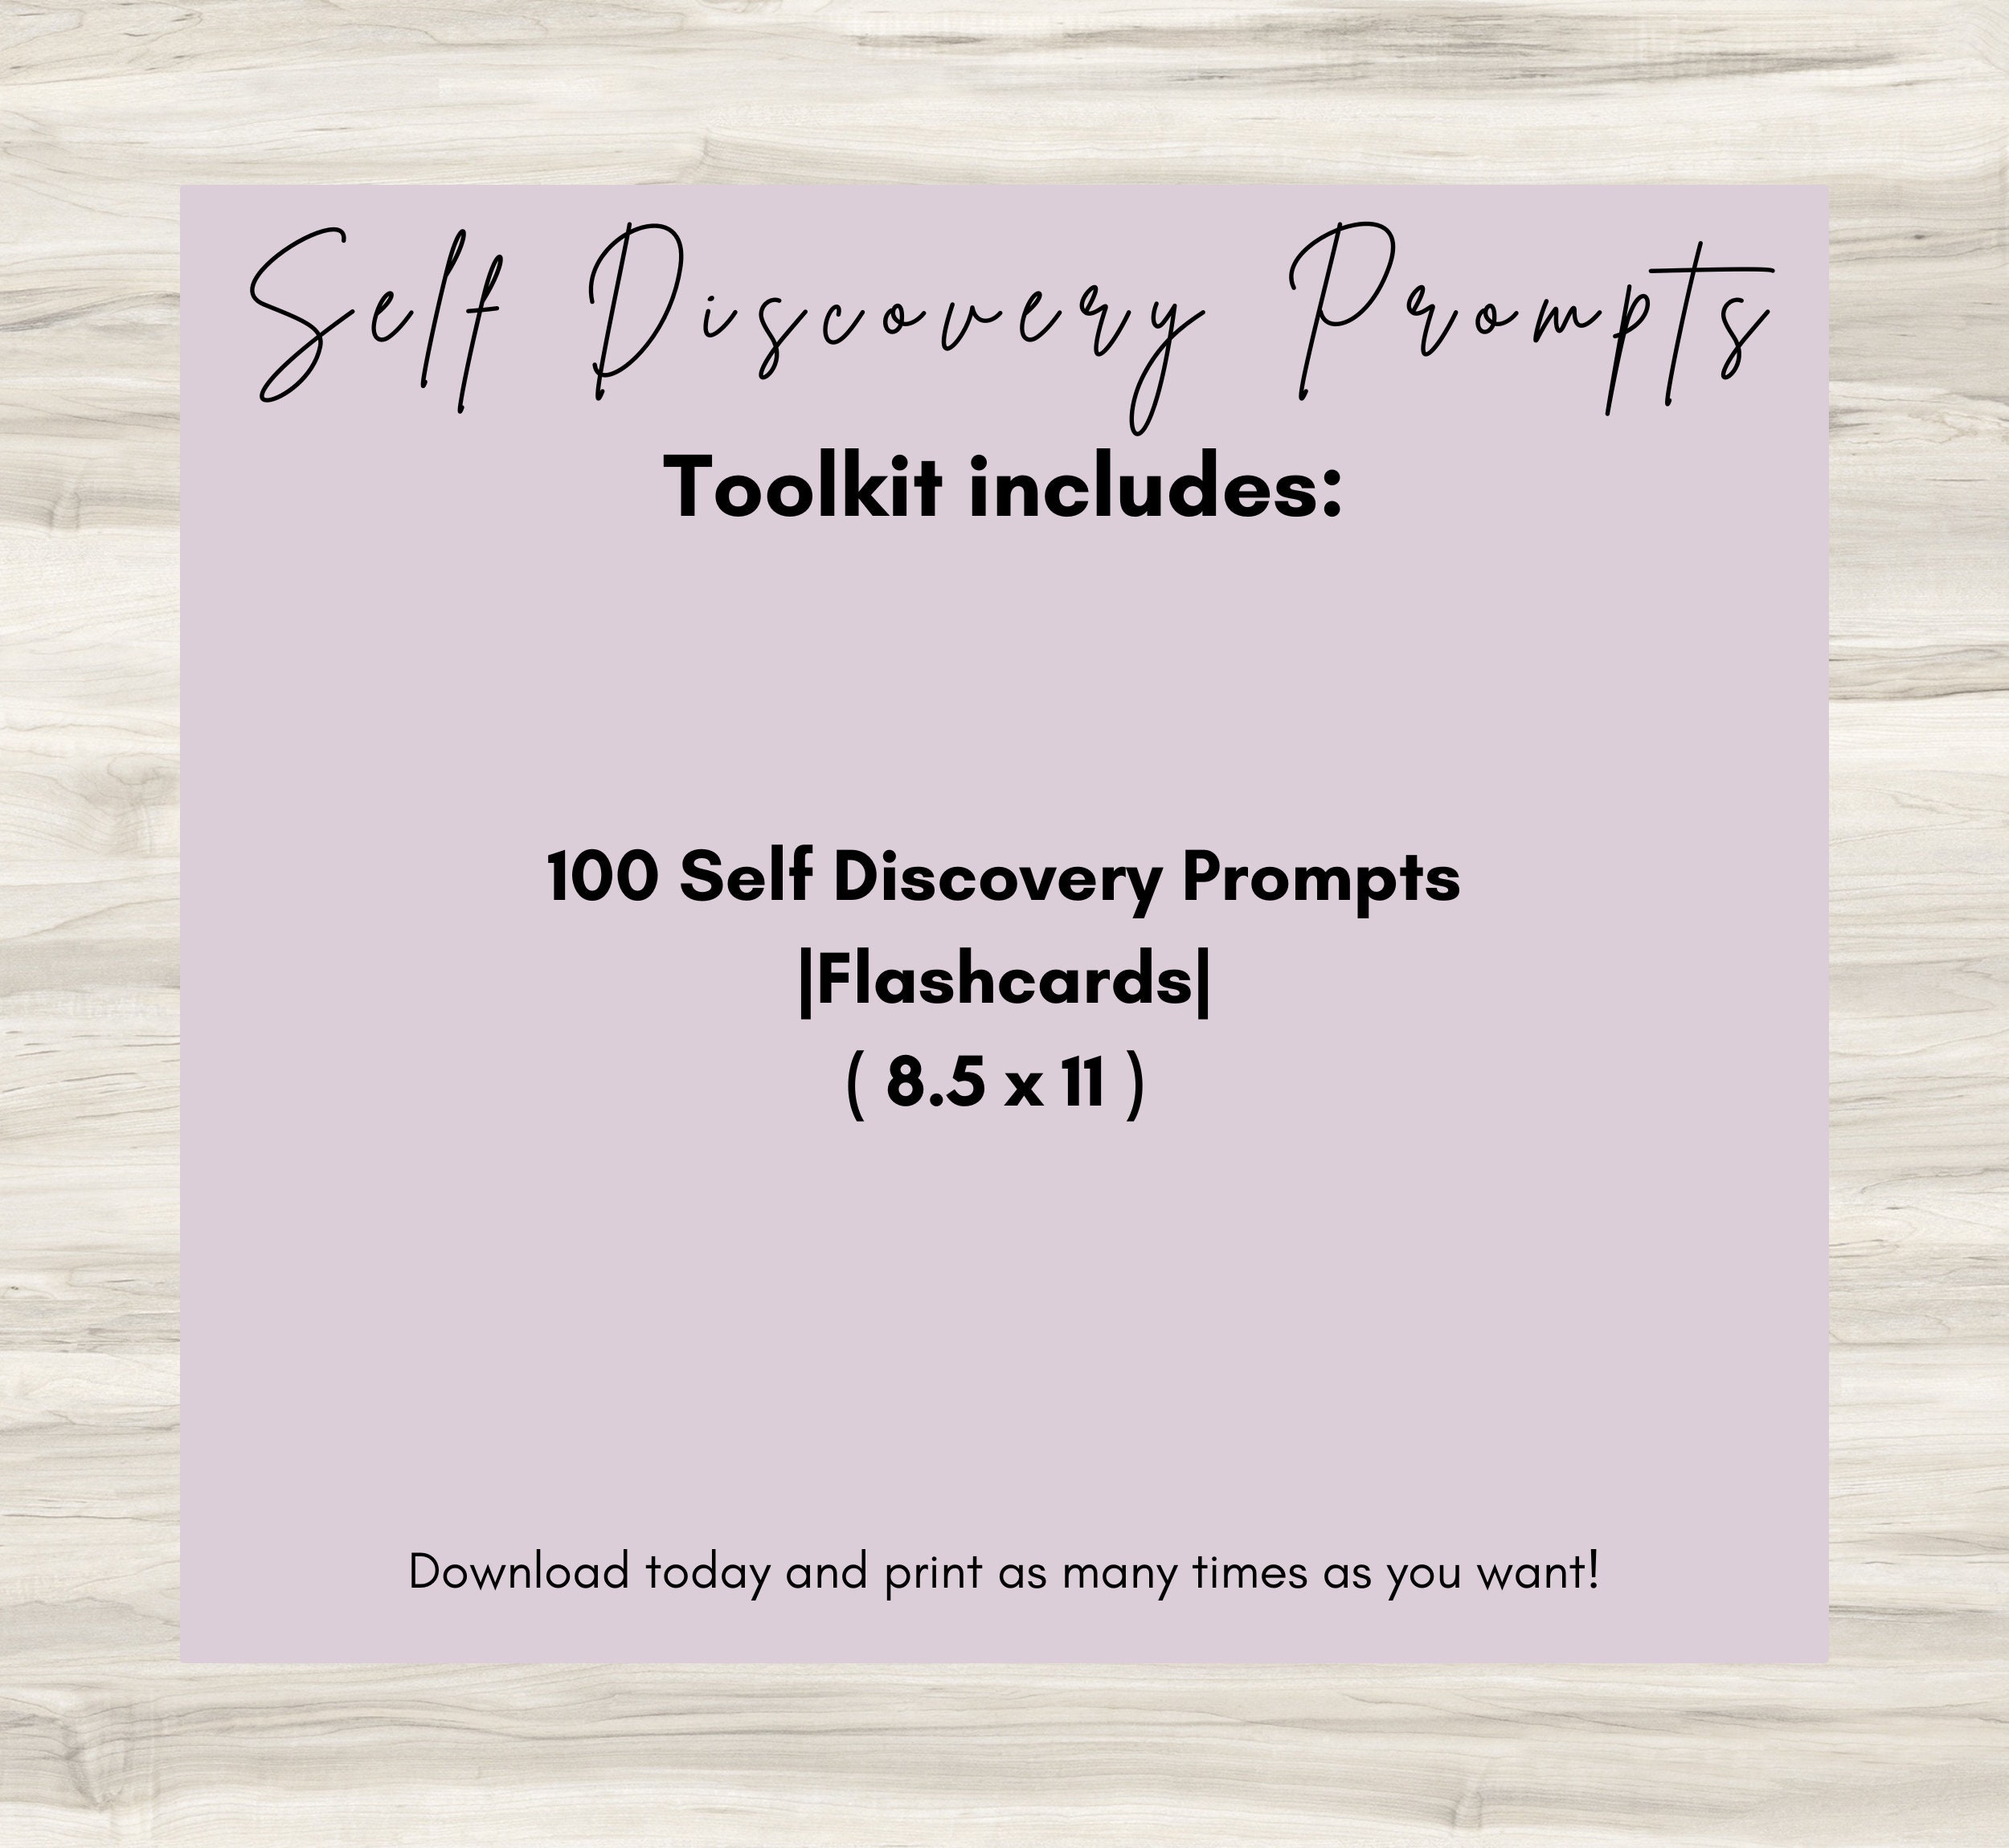 Free Journal Prompts for Self-Discovery - Here to Thrive